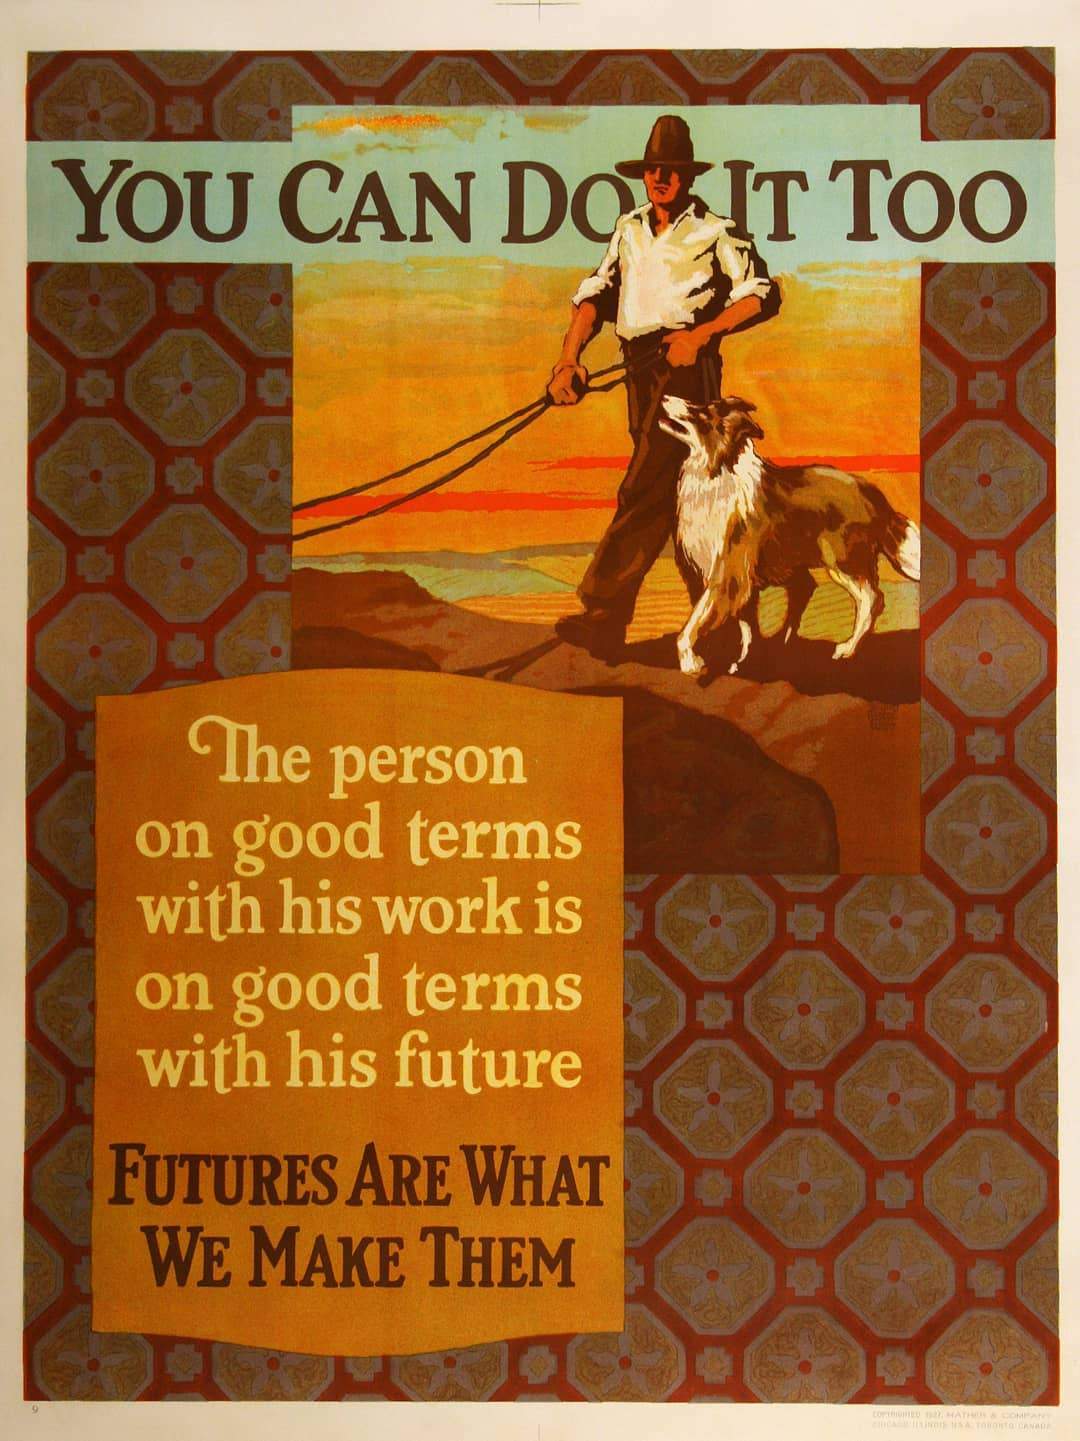 Original Mather Work Incentive Poster 1927 by Elmes - You Can Do It Too